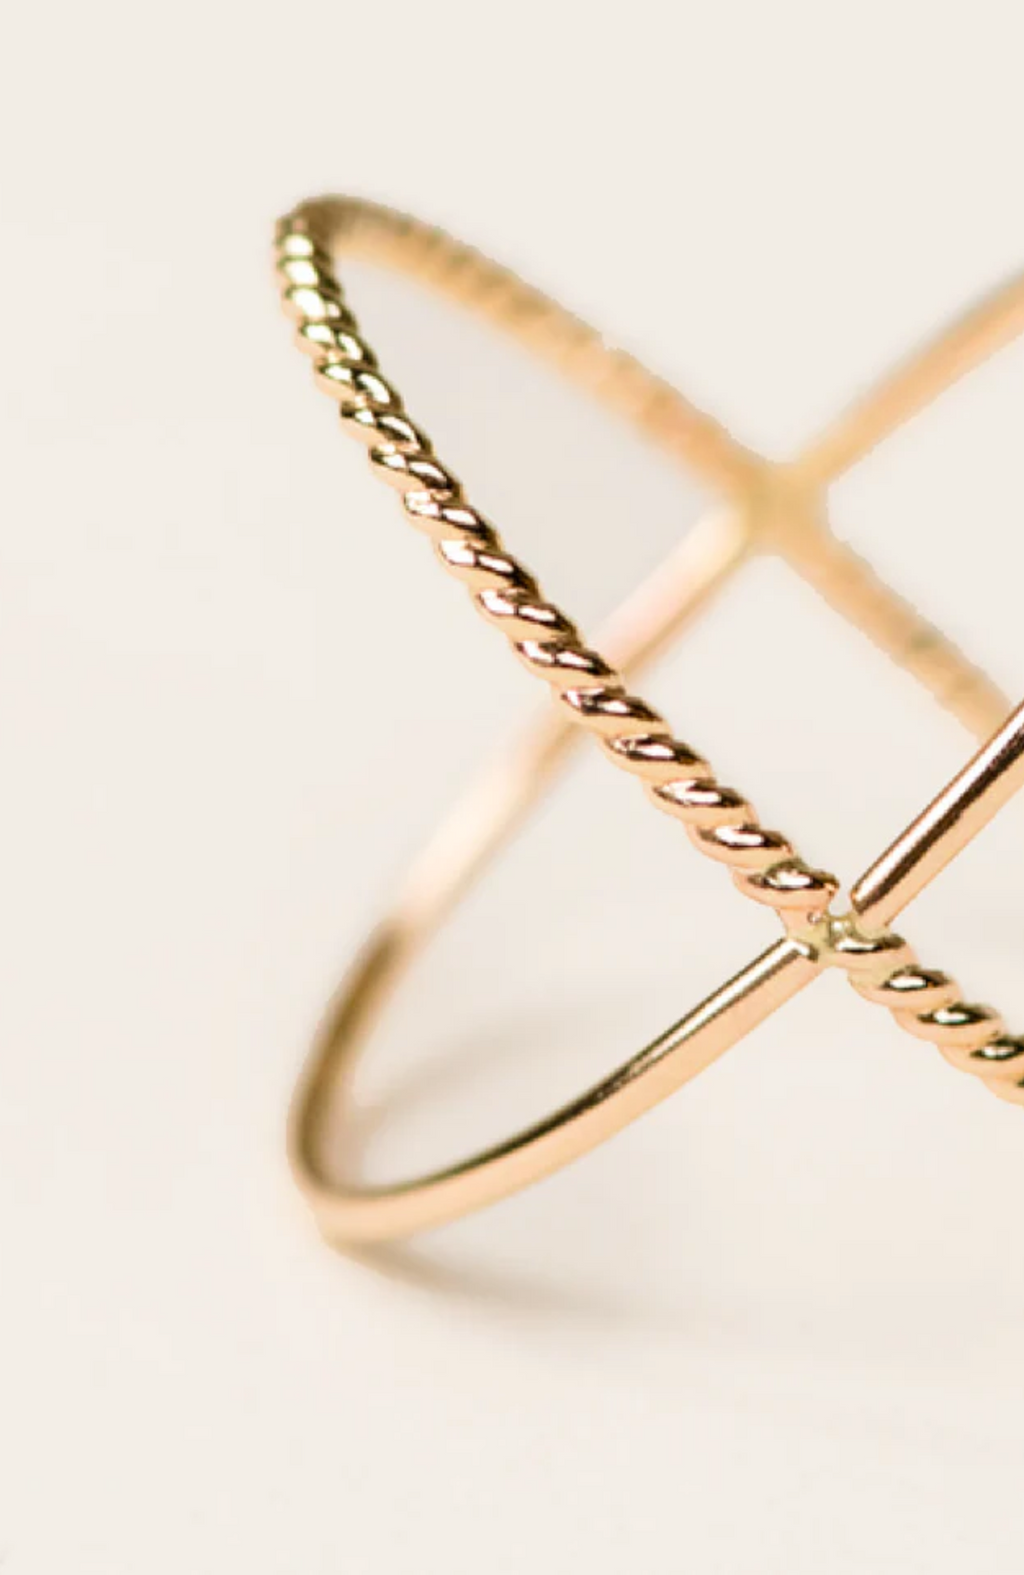 Able - Braided X Ring